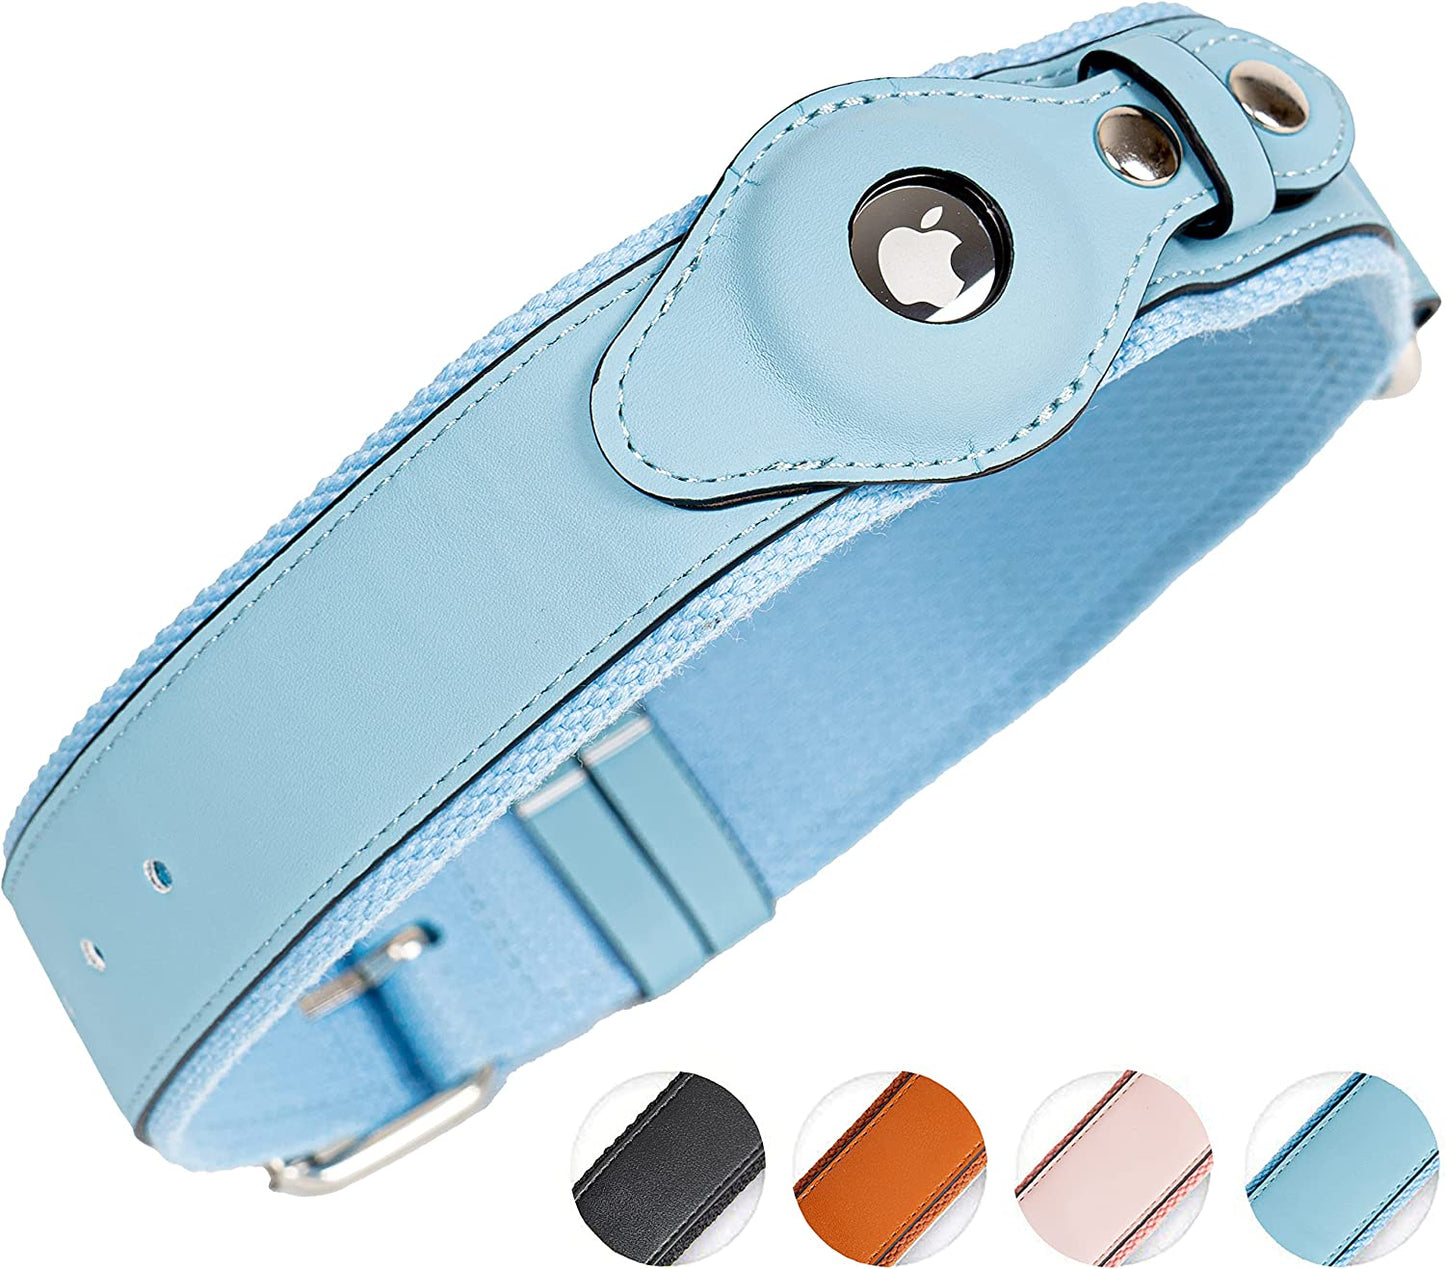 Safe Paws Airtag Dog Collar Holder - Our Adjustable Air Tag Dog Collar Holder Fits Small Medium and Large Dogs - Use Our Elegant PU Leather Dog Airtag Collar to Quickly Locate Your Dog Electronics > GPS Accessories > GPS Cases Safe Paws Blue Large 